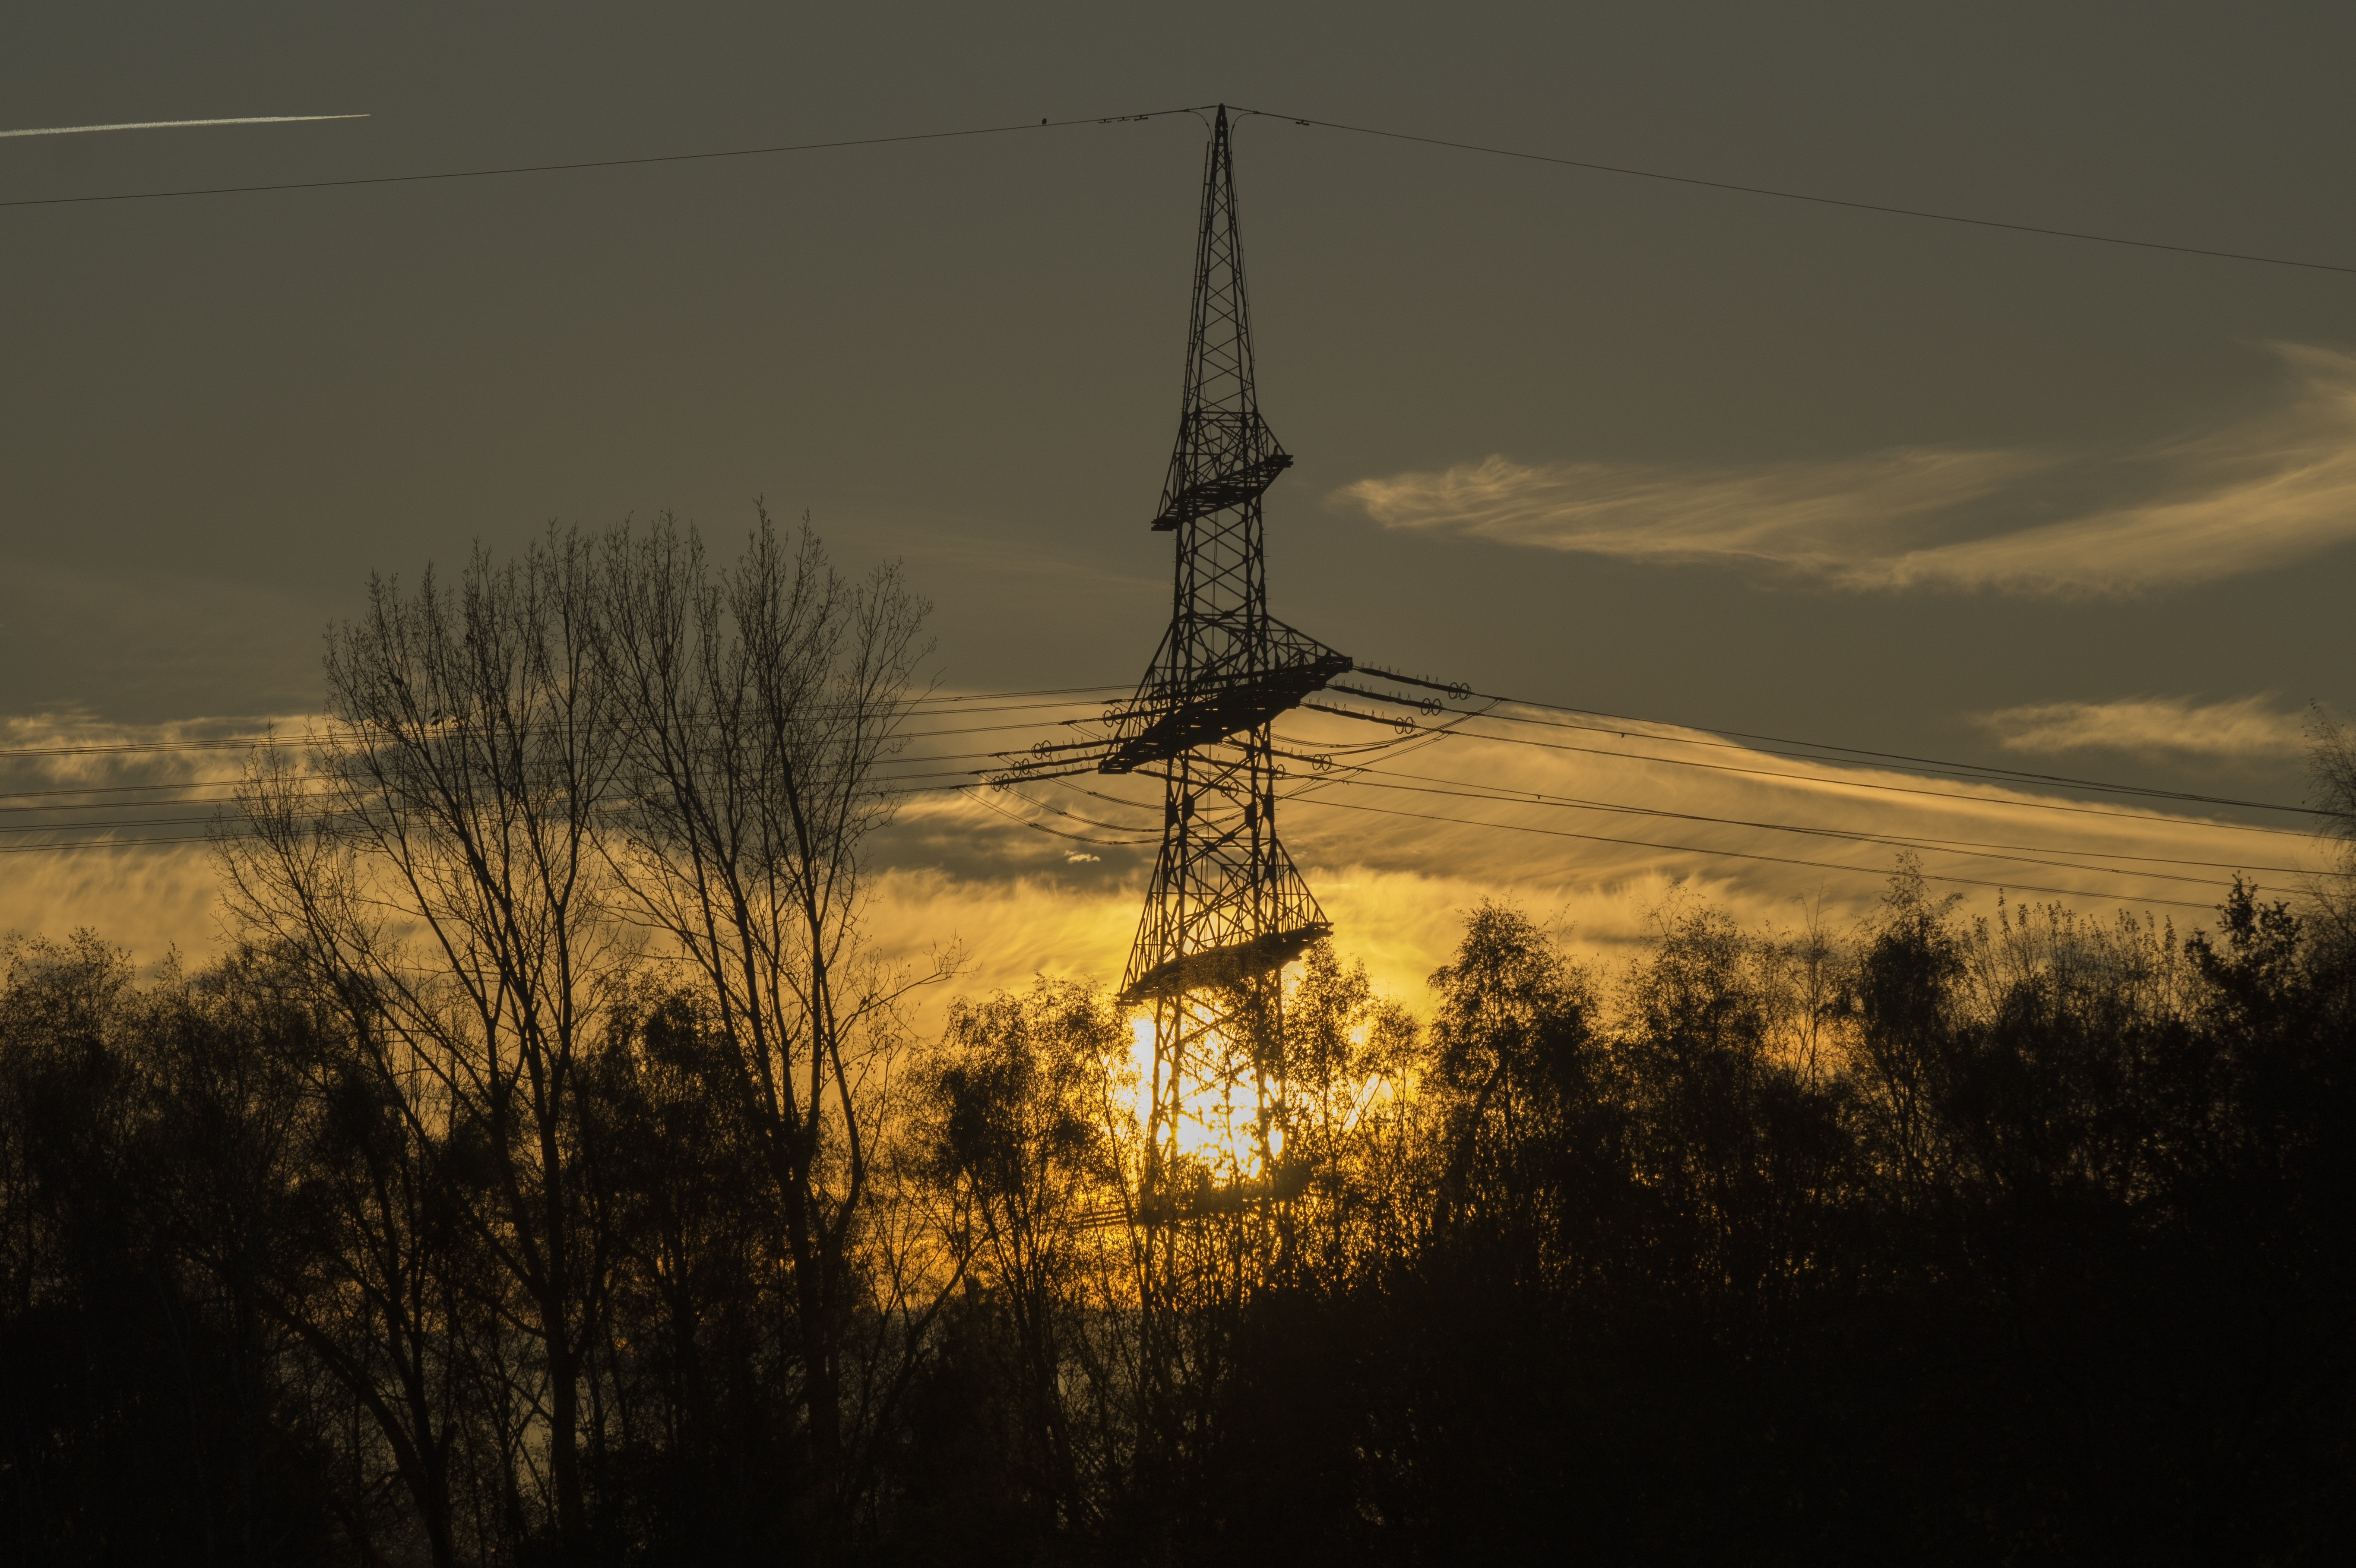 silhouette photo of wither tree and electric cable tower